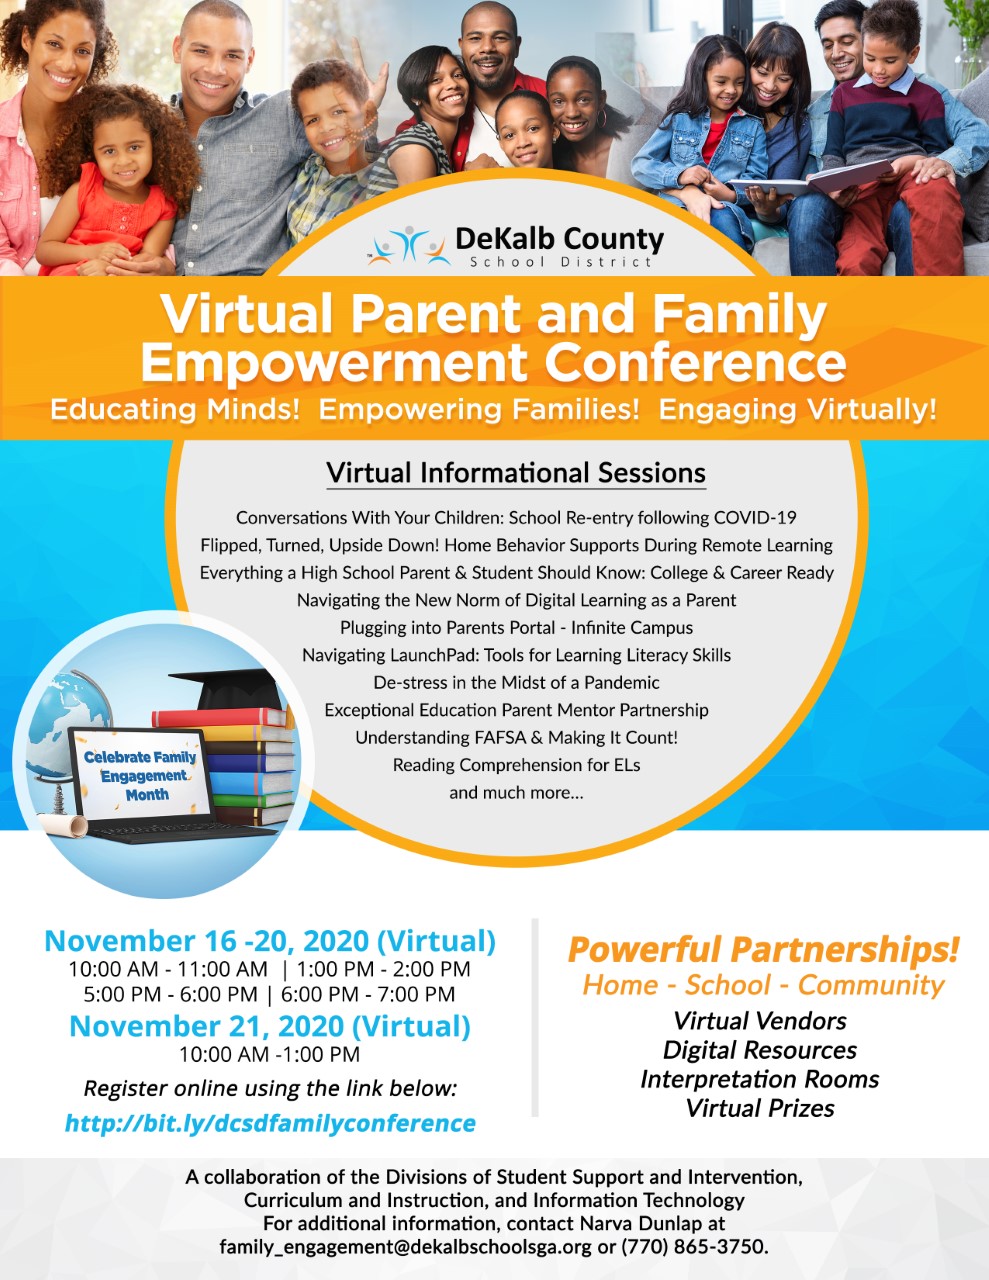 Virtual Parent and Family Empowerment Conference